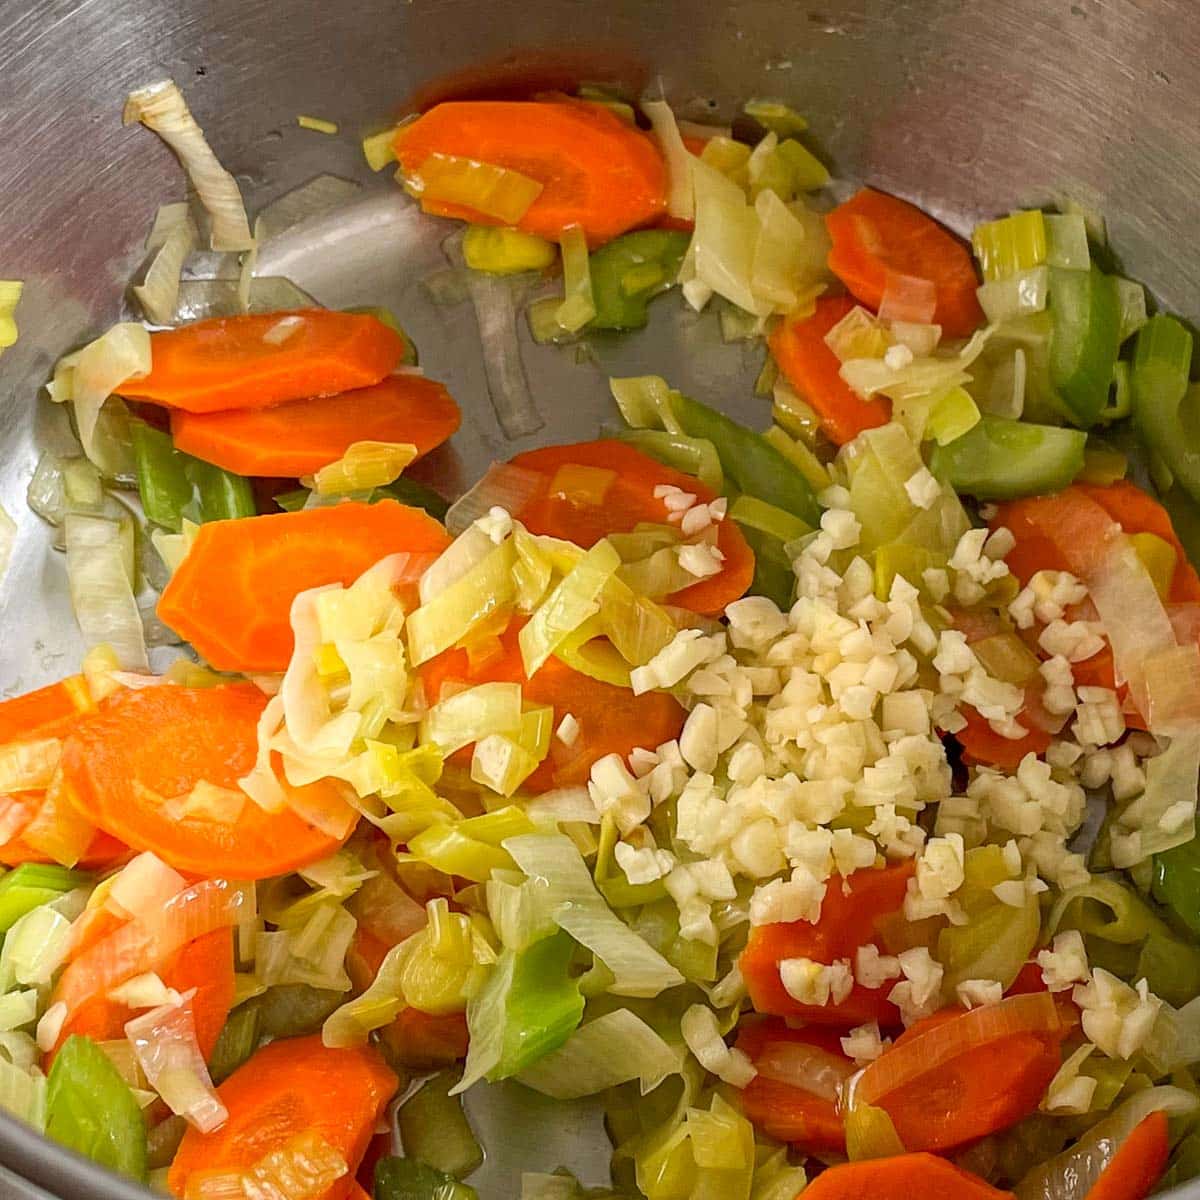 Minced garlic is added to sauteed carrot, celery, and leek in a stainless steel pot.